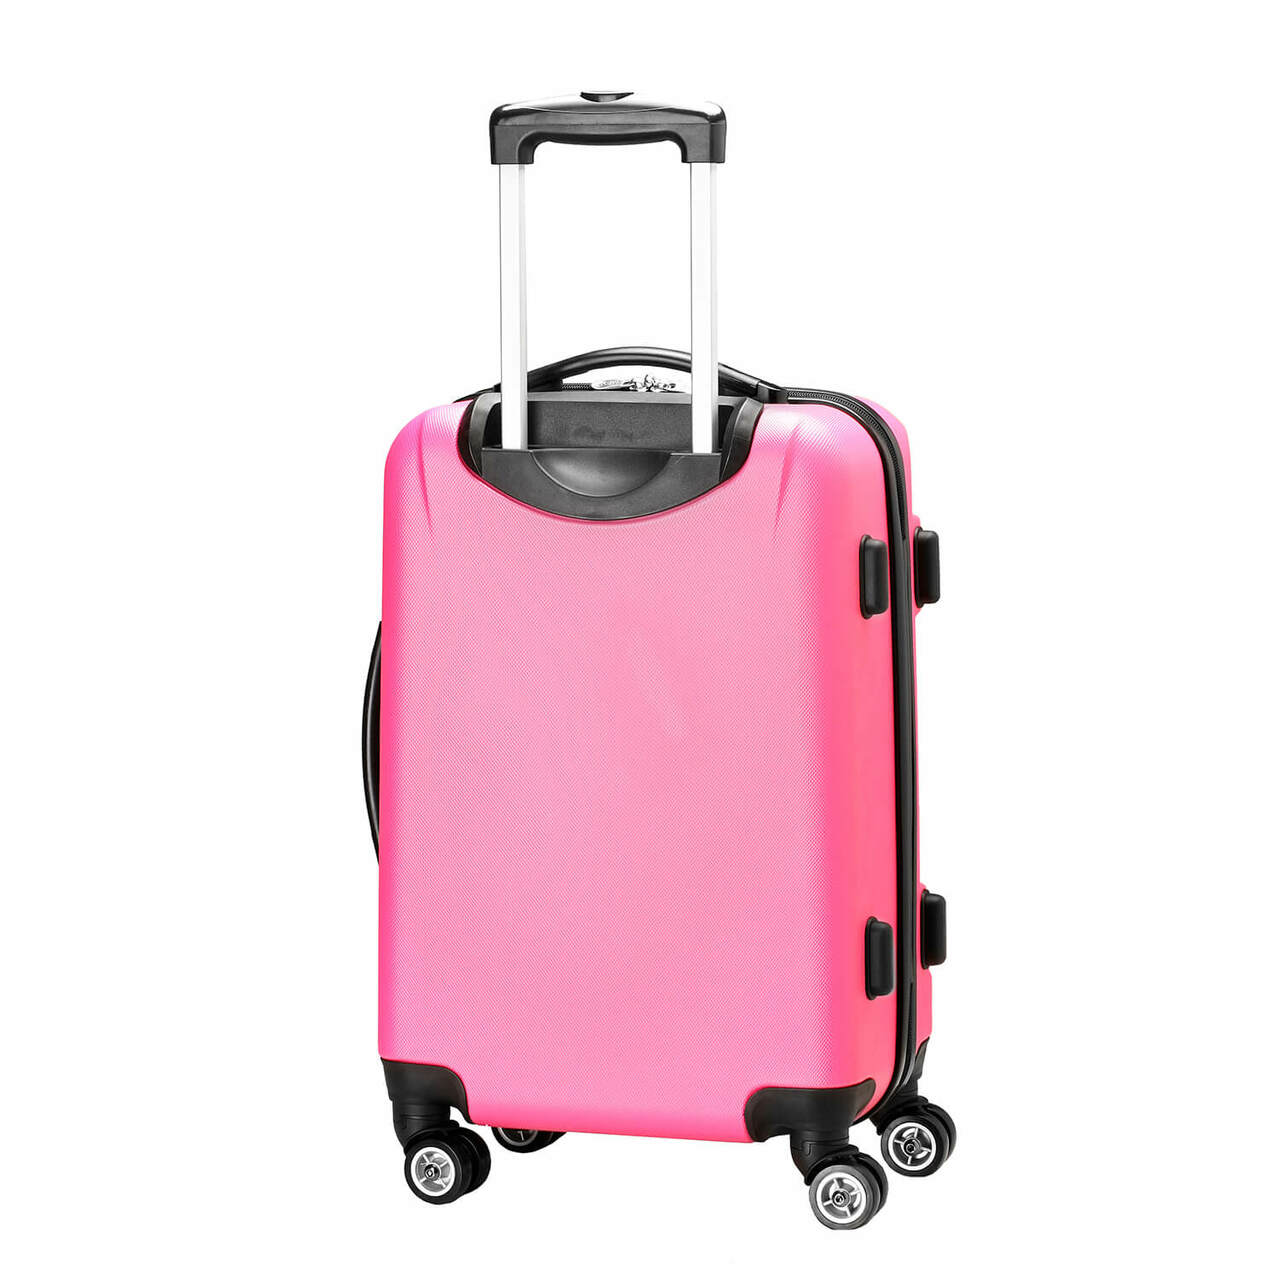 Nevada Wolf Pack 20" Pink Domestic Carry-on Spinner